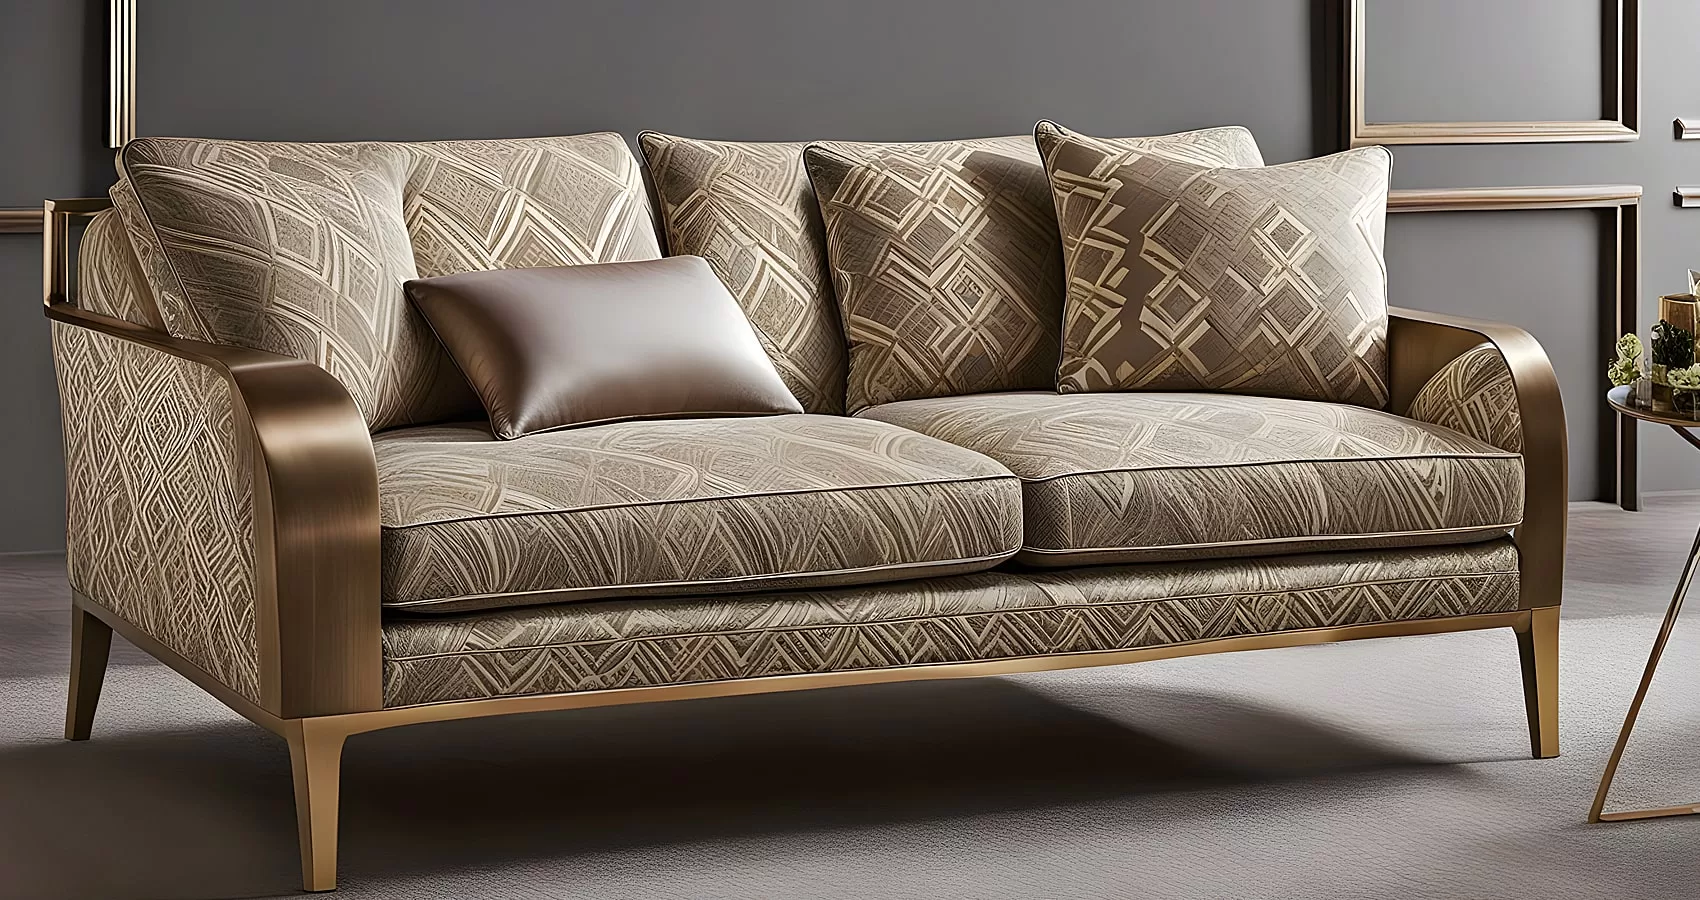 Contemporary Sofa | Contemporary Sofa Set | Contemporary Couches 